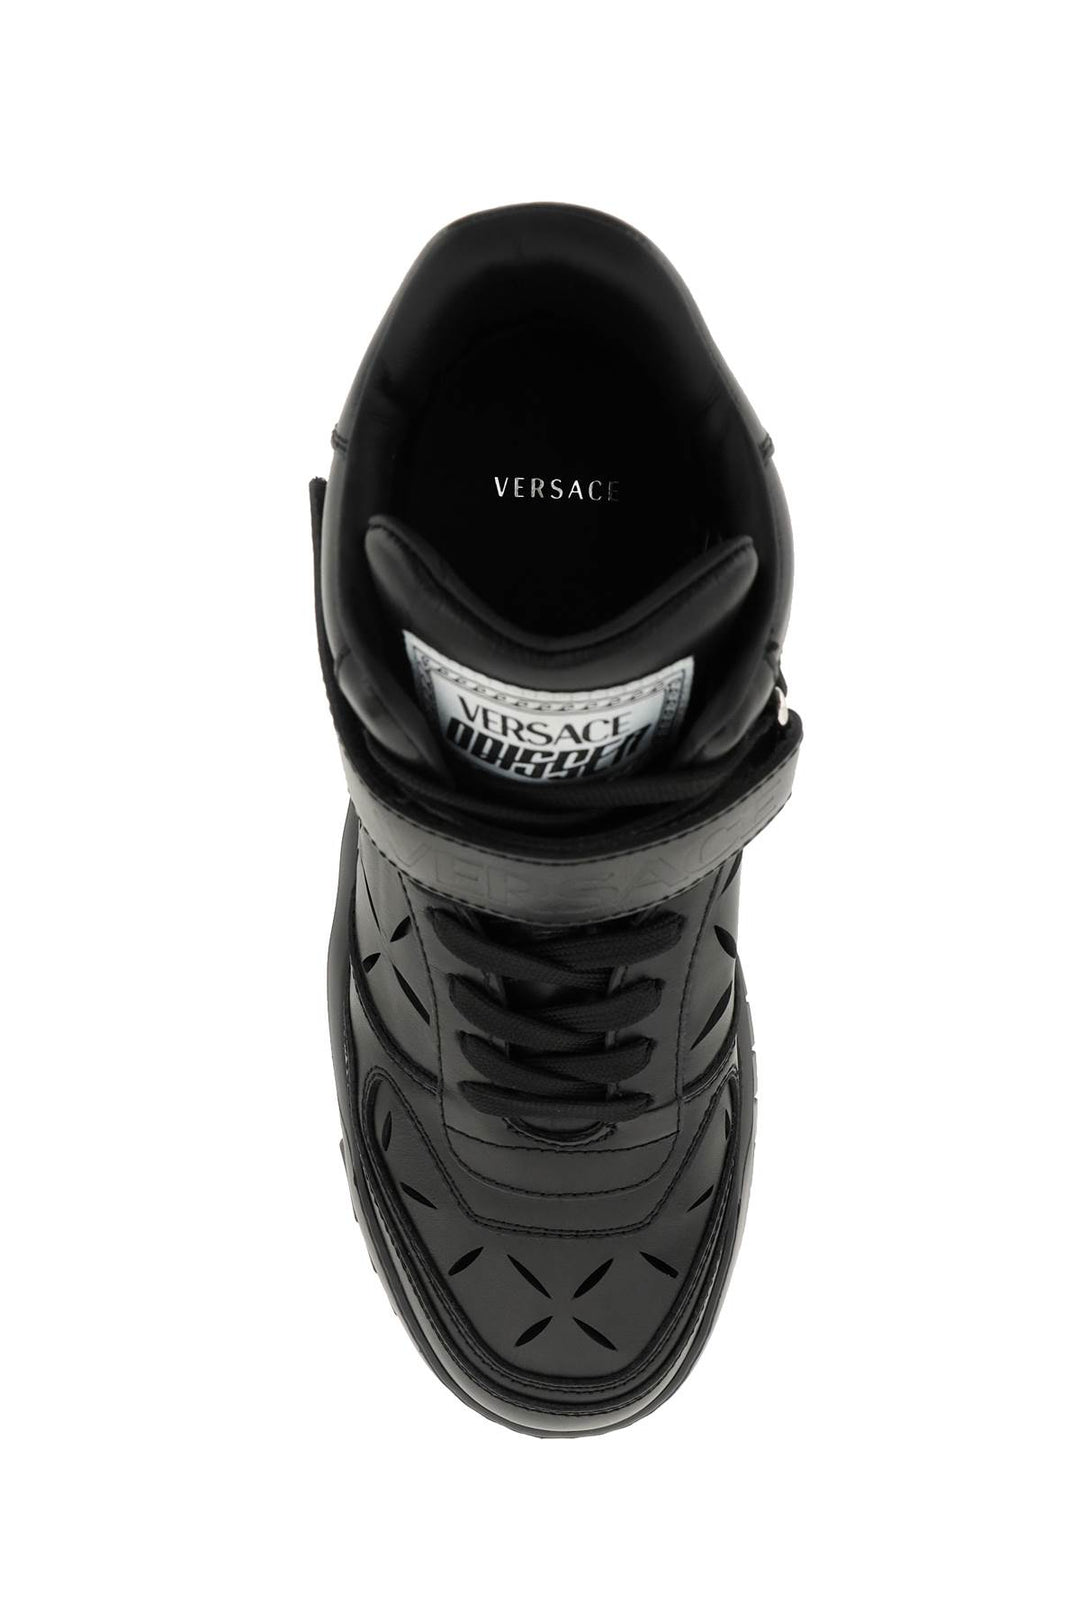 Versace 'Odissea' Sneakers With  Cut Outs   Nero